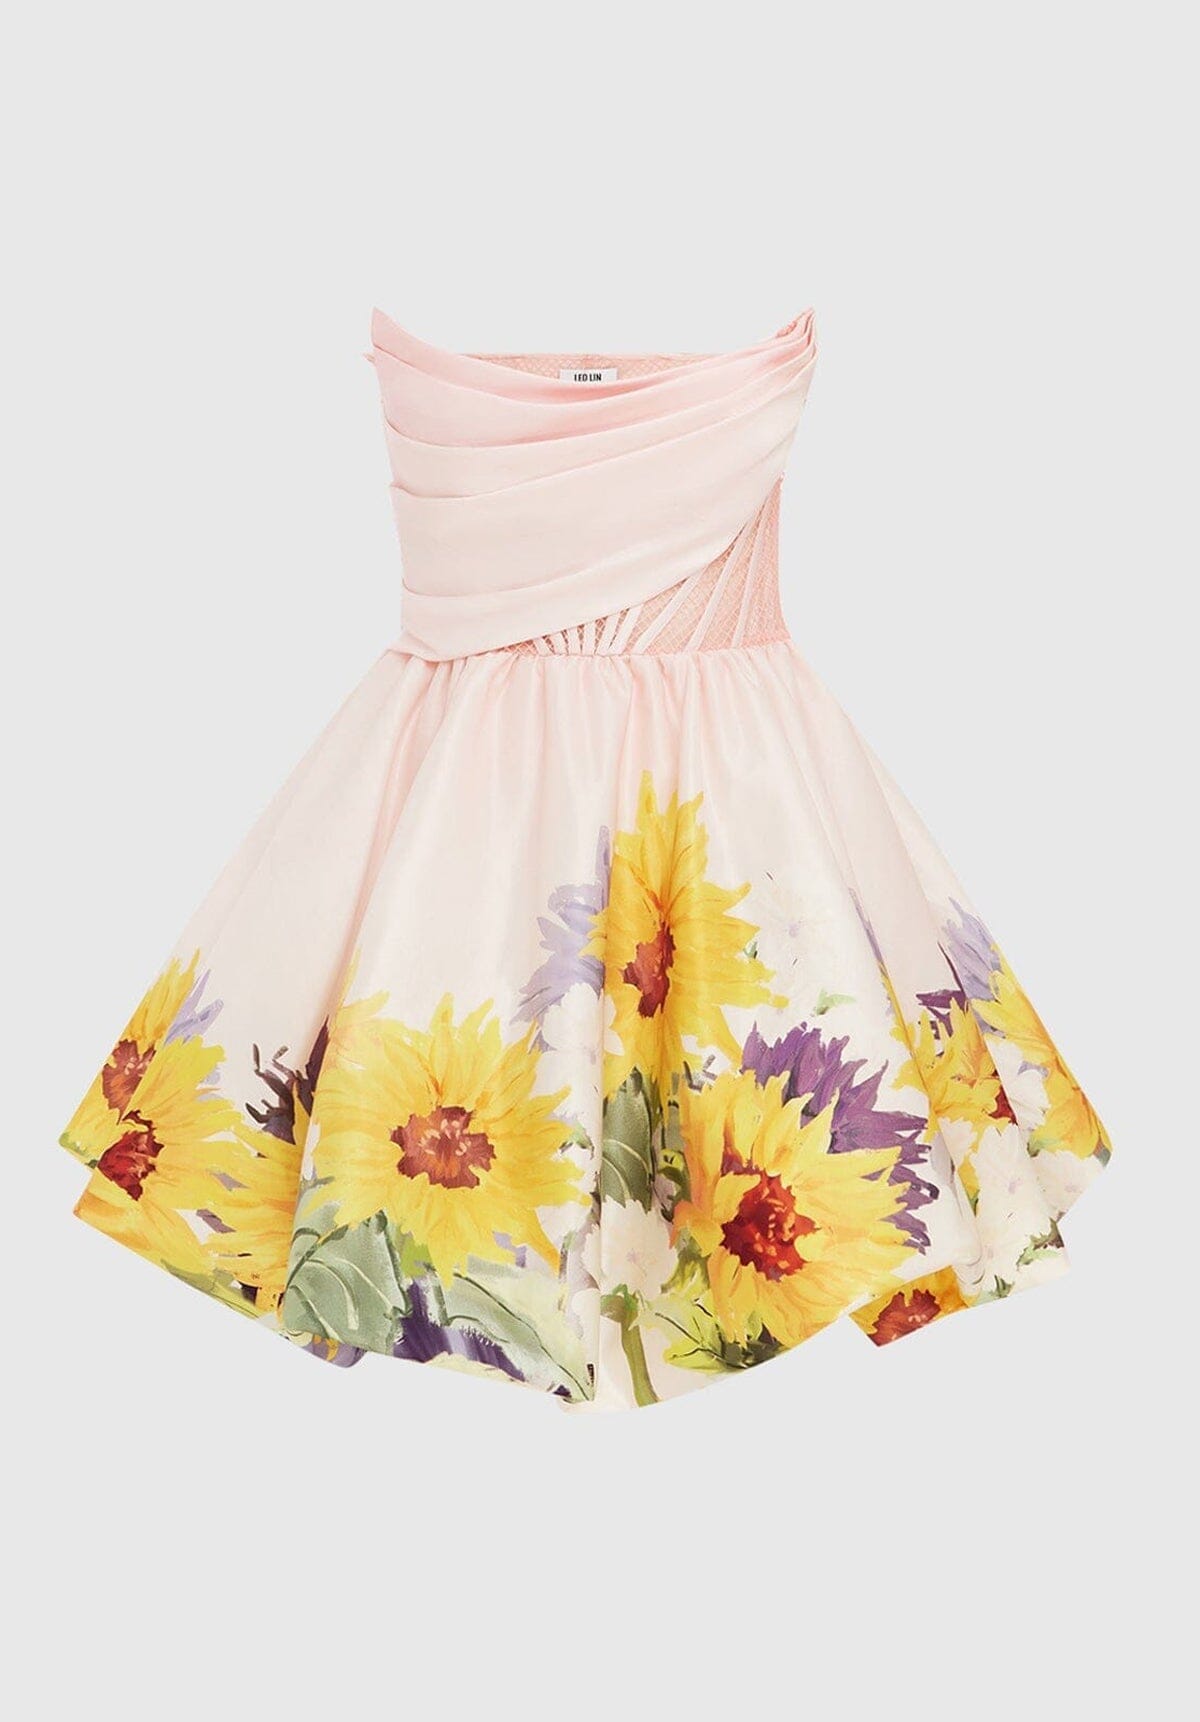 SELL Katy Bustier Mini Dress - Sunflower Print in Pink Gift Card Ex Rentals 